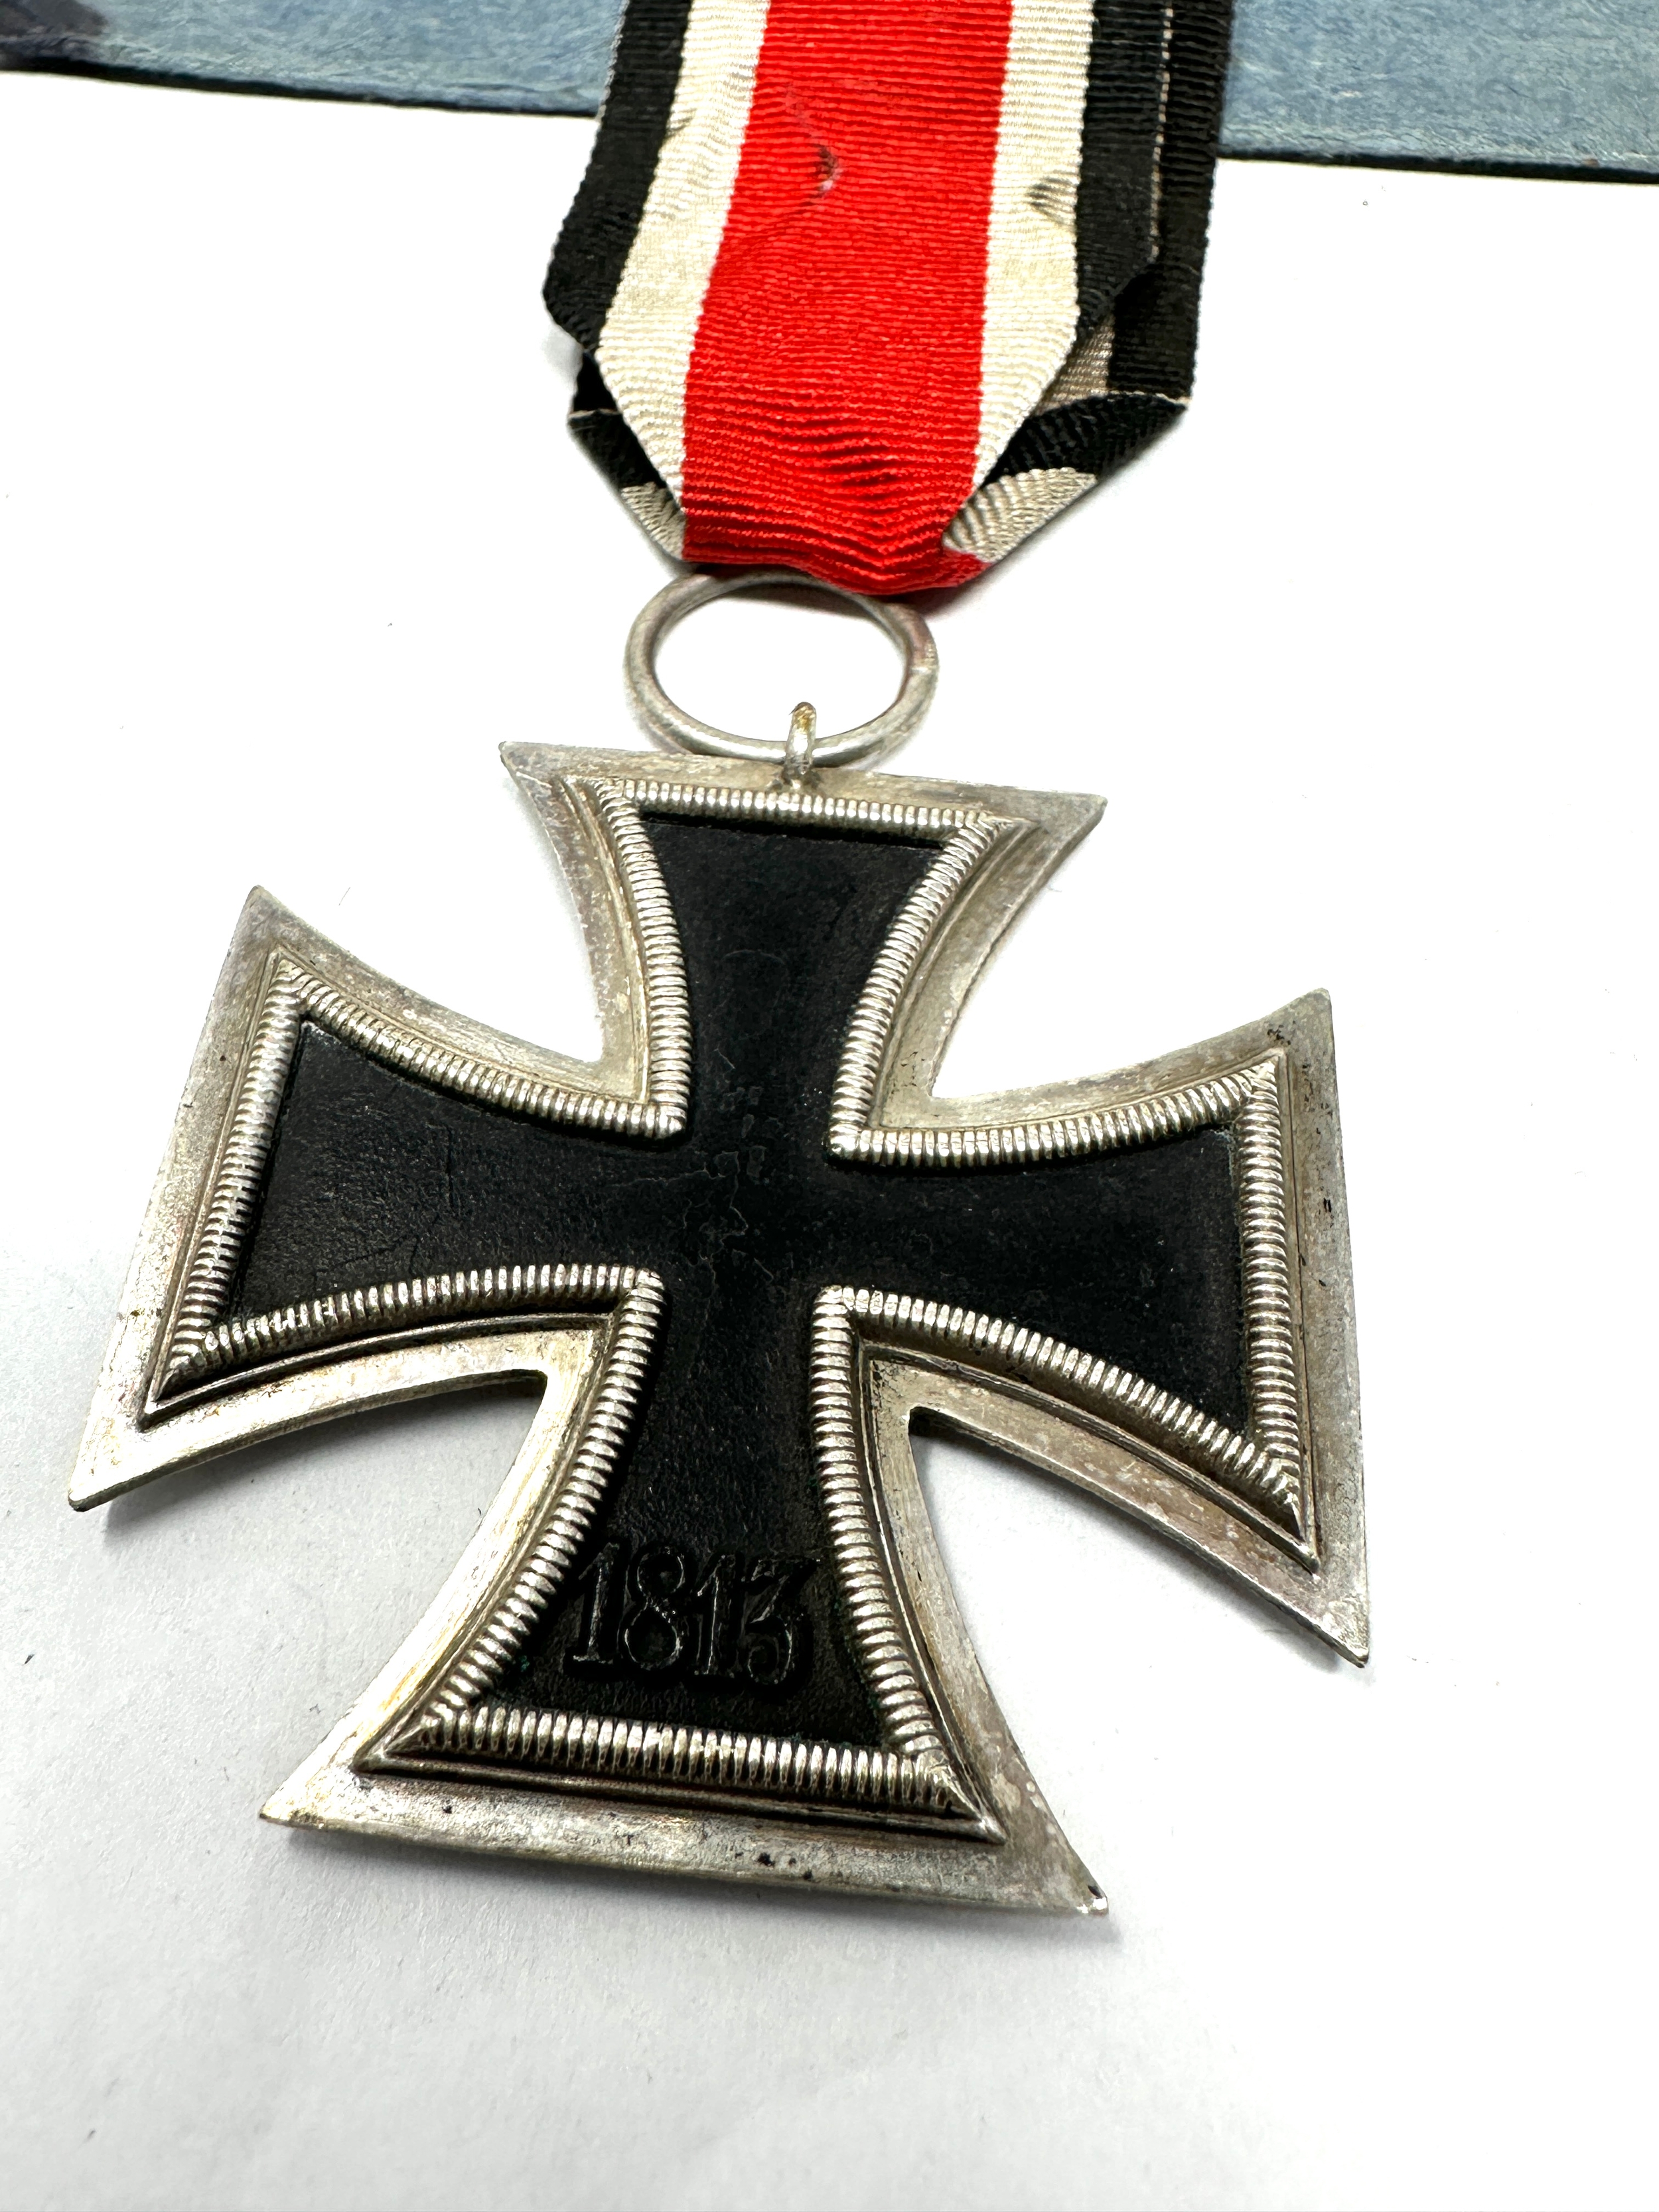 ww2 german iron cross 2nd class & paper packet ring stamp No 4 - Image 3 of 3